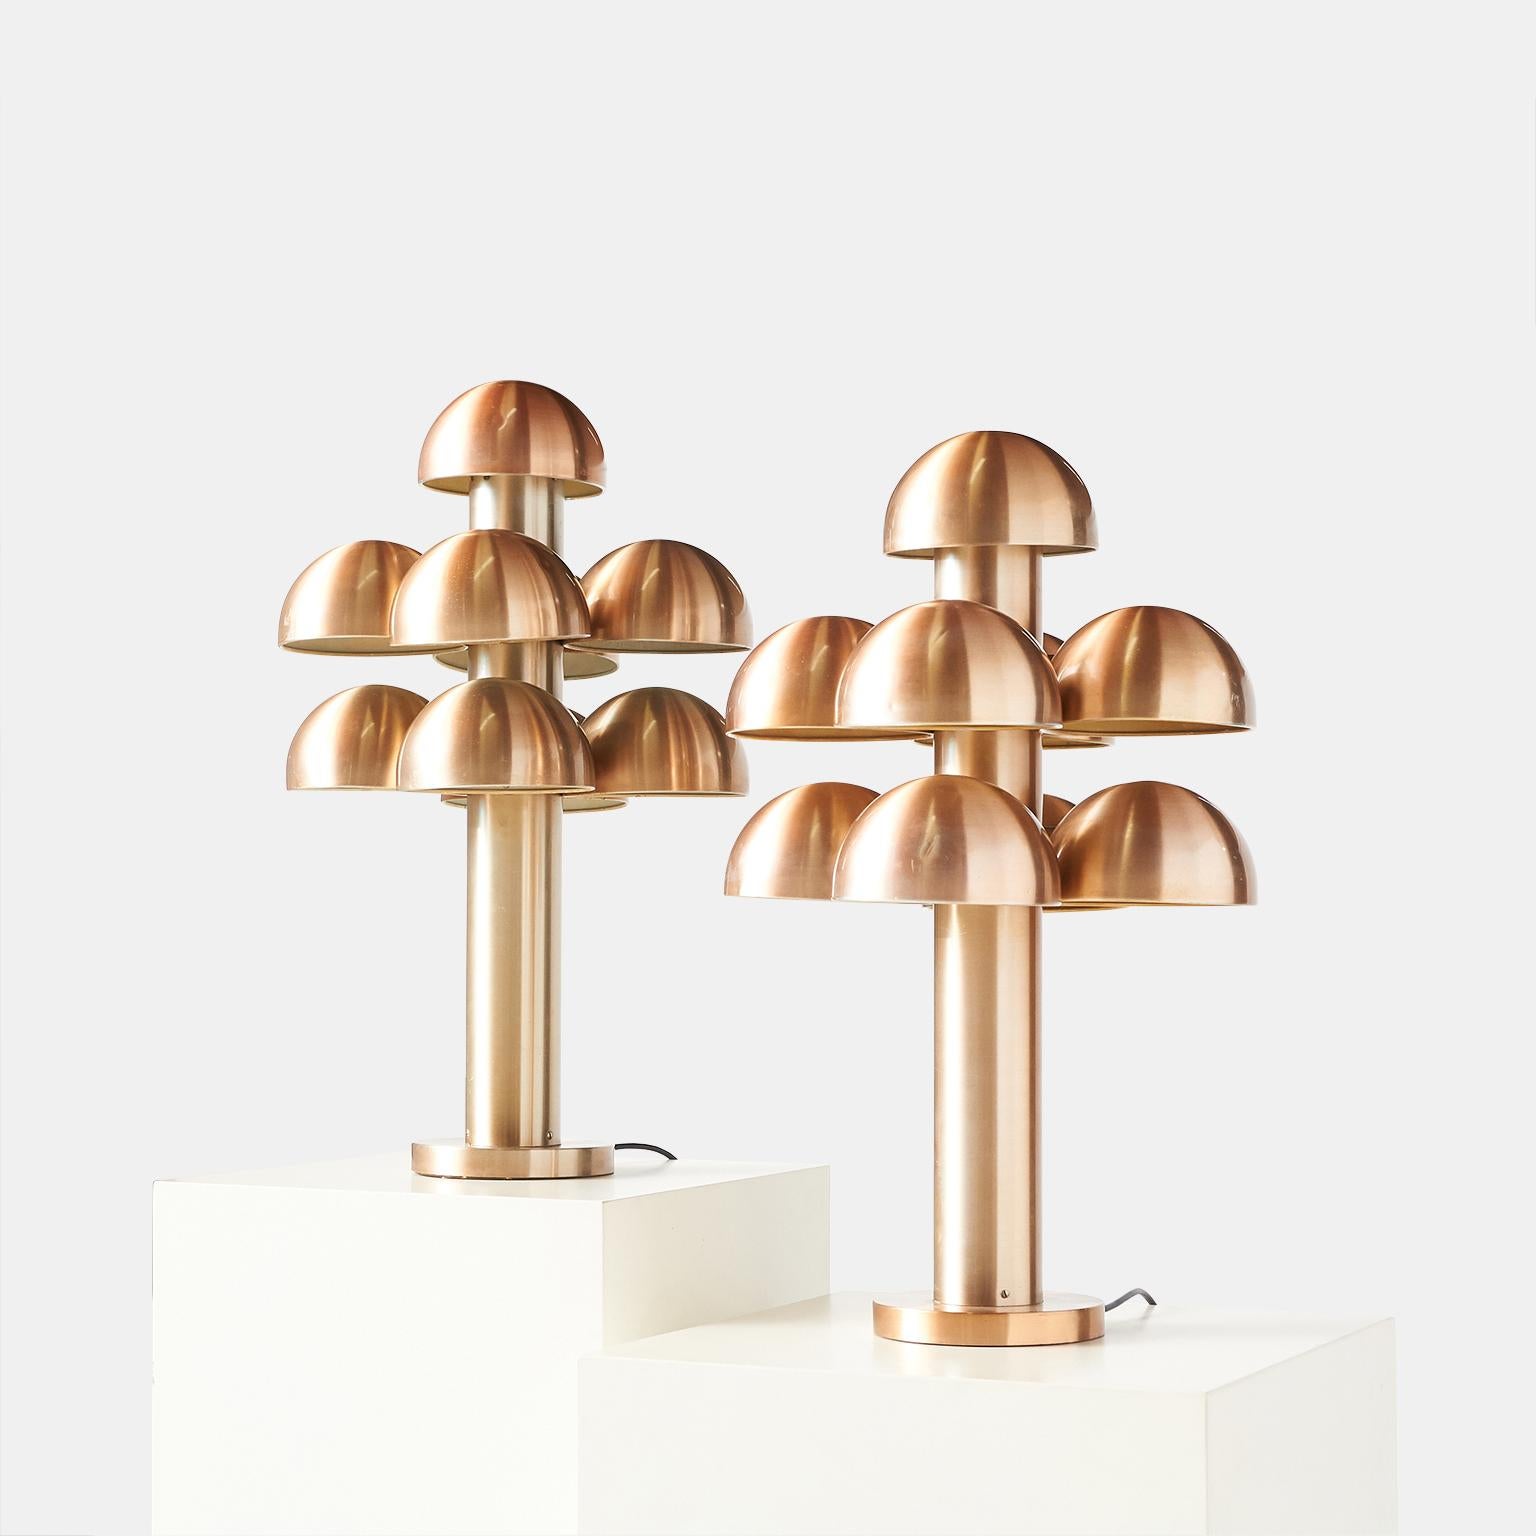 Pair of table lamps “Cantharelle” by Maija Liisa Komulainen for RAAK
An extremely rare and collectible pair of mushroom shaped lamps in anodized aluminum. Each lamp has 9 working sockets with shades.
Made for RAAK in 1972.